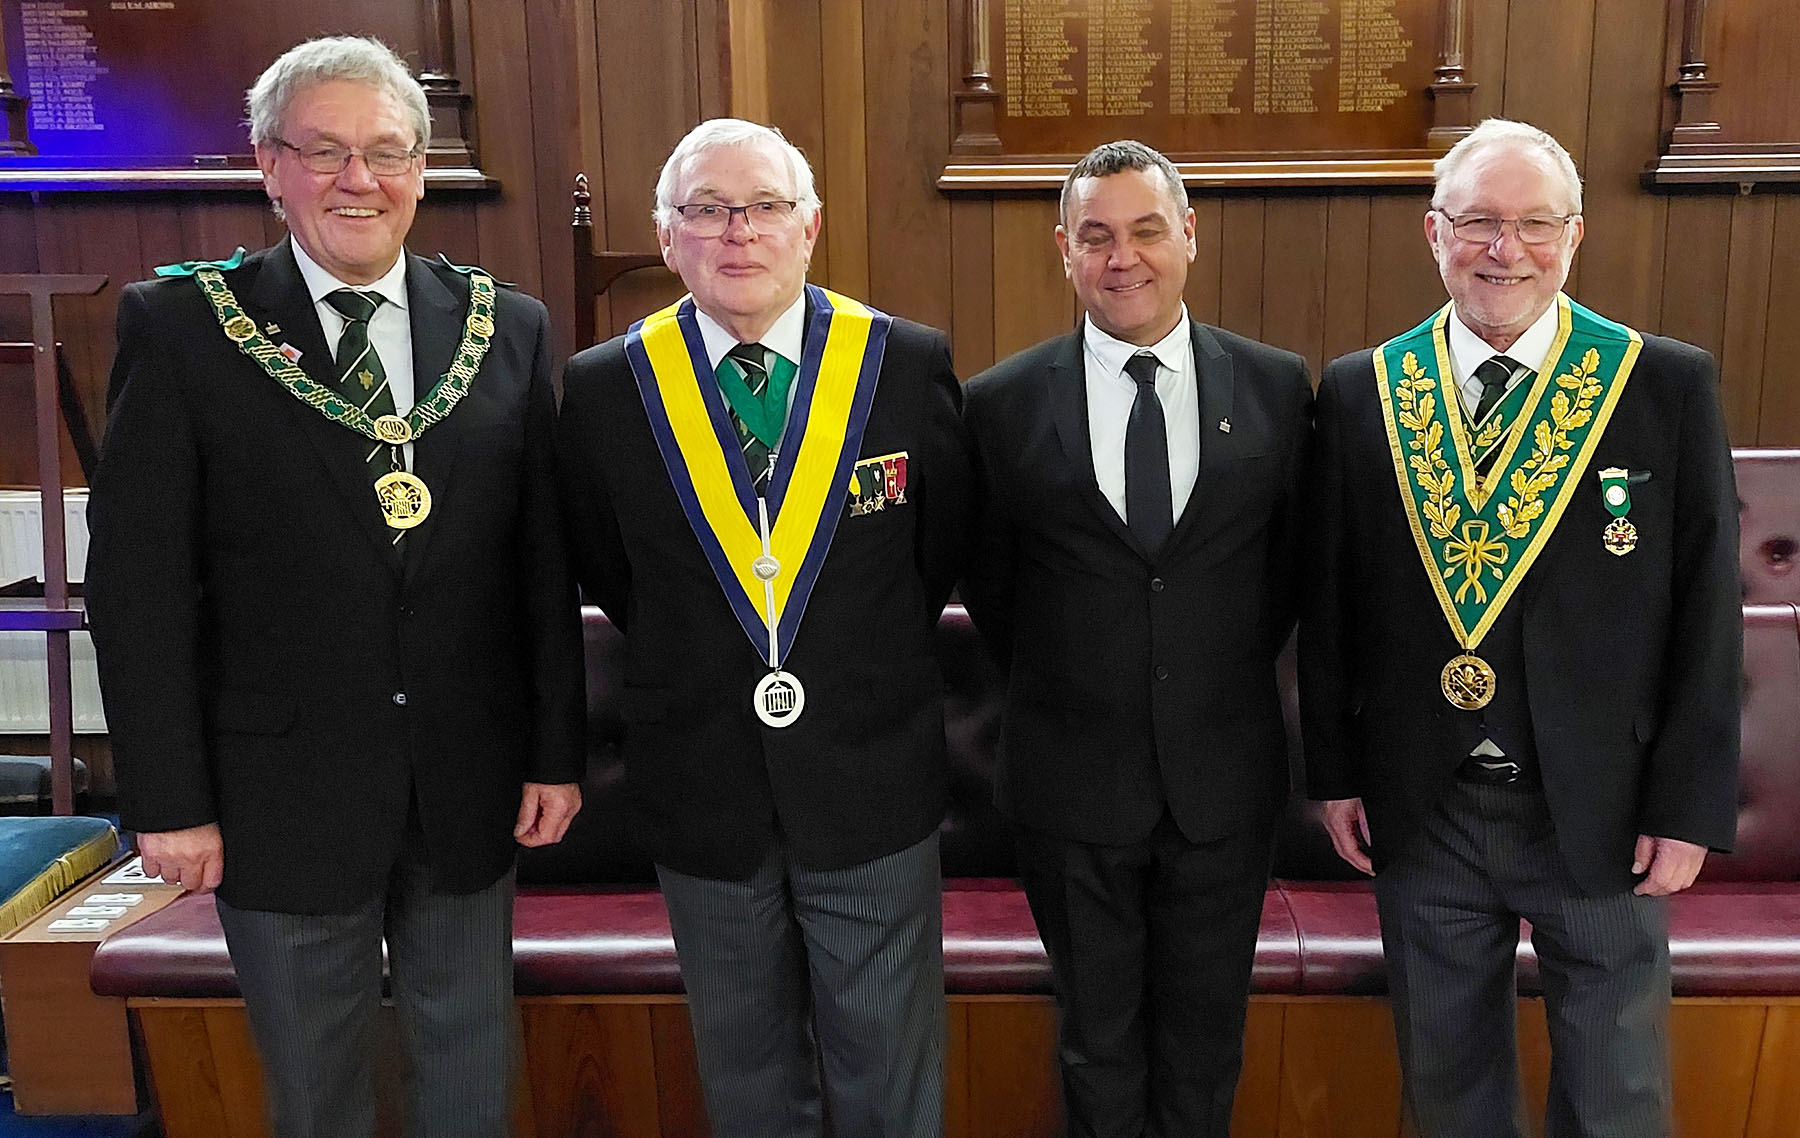 Bro. Nick with the D.G.P., with W.Bro's Fred Brown (WM) and David Green